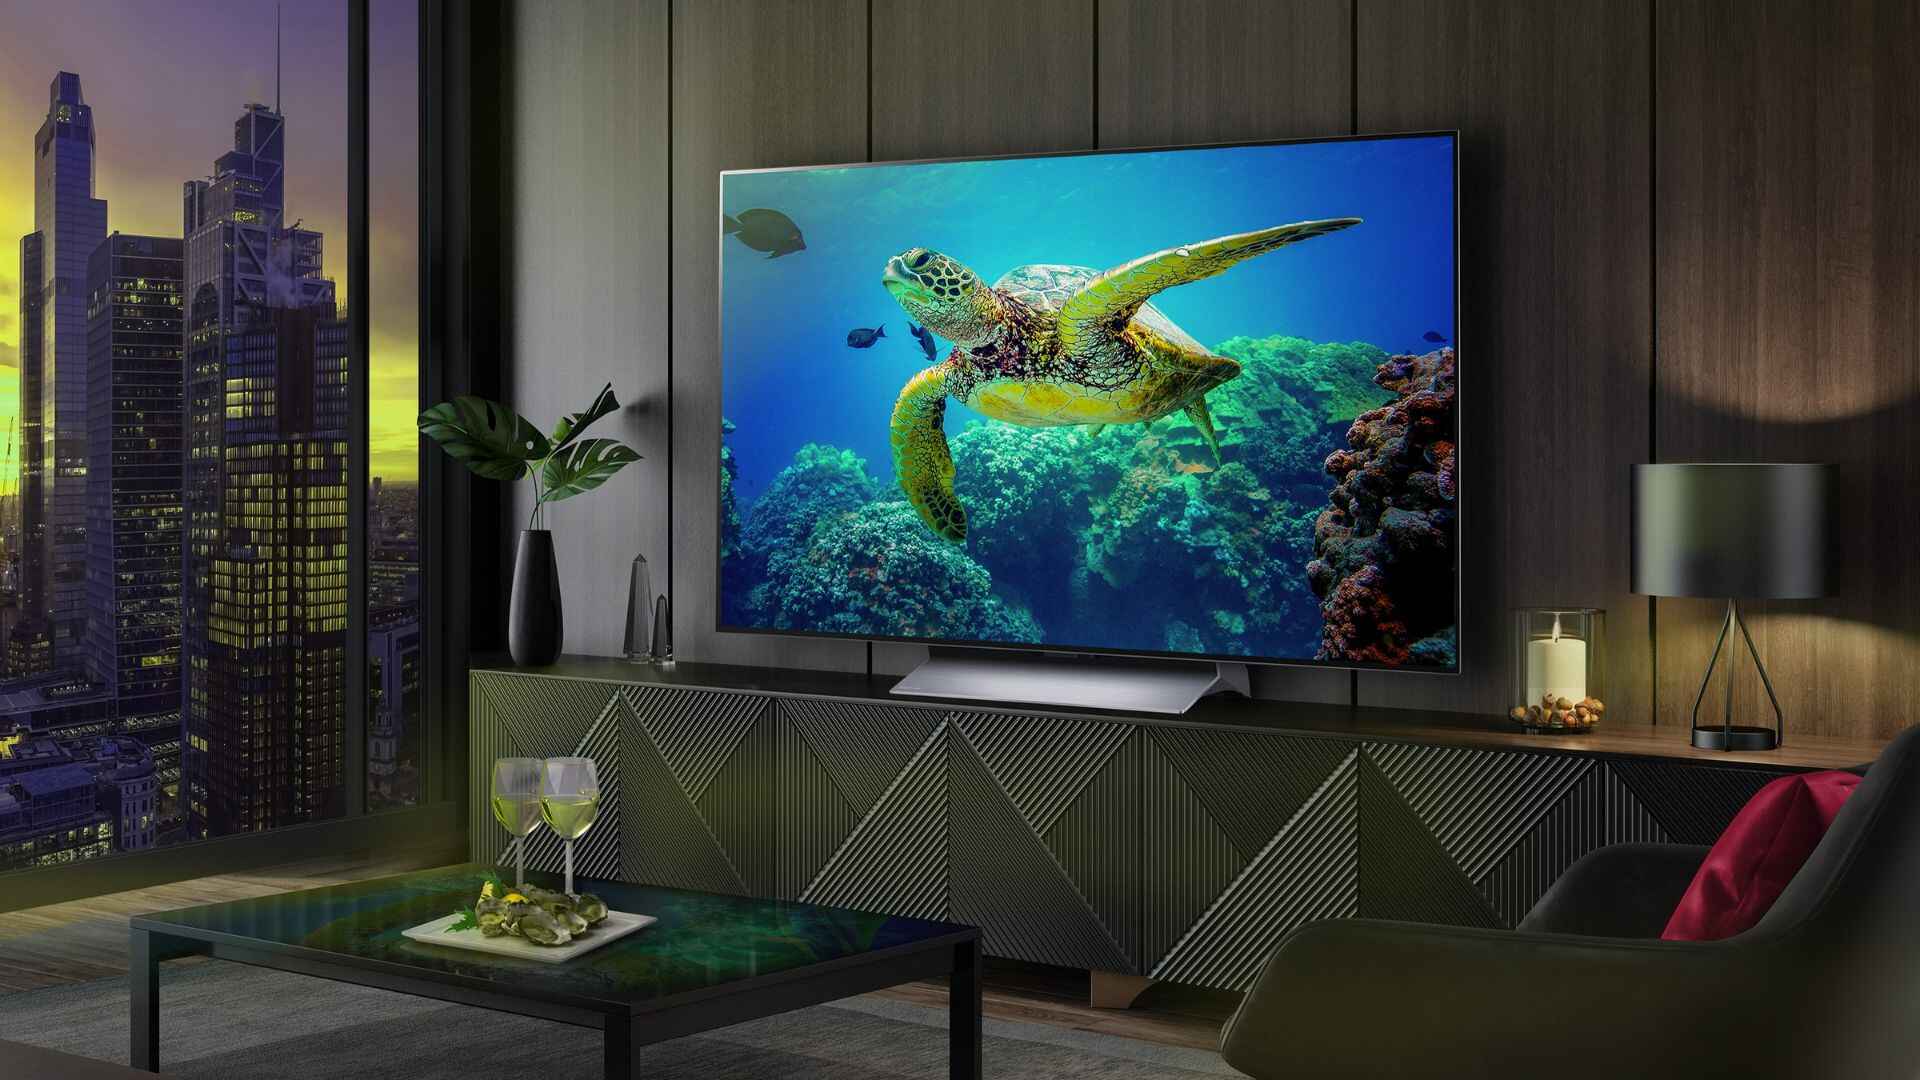 TV Refresh Rates Explained: 60Hz, 120Hz, and Beyond